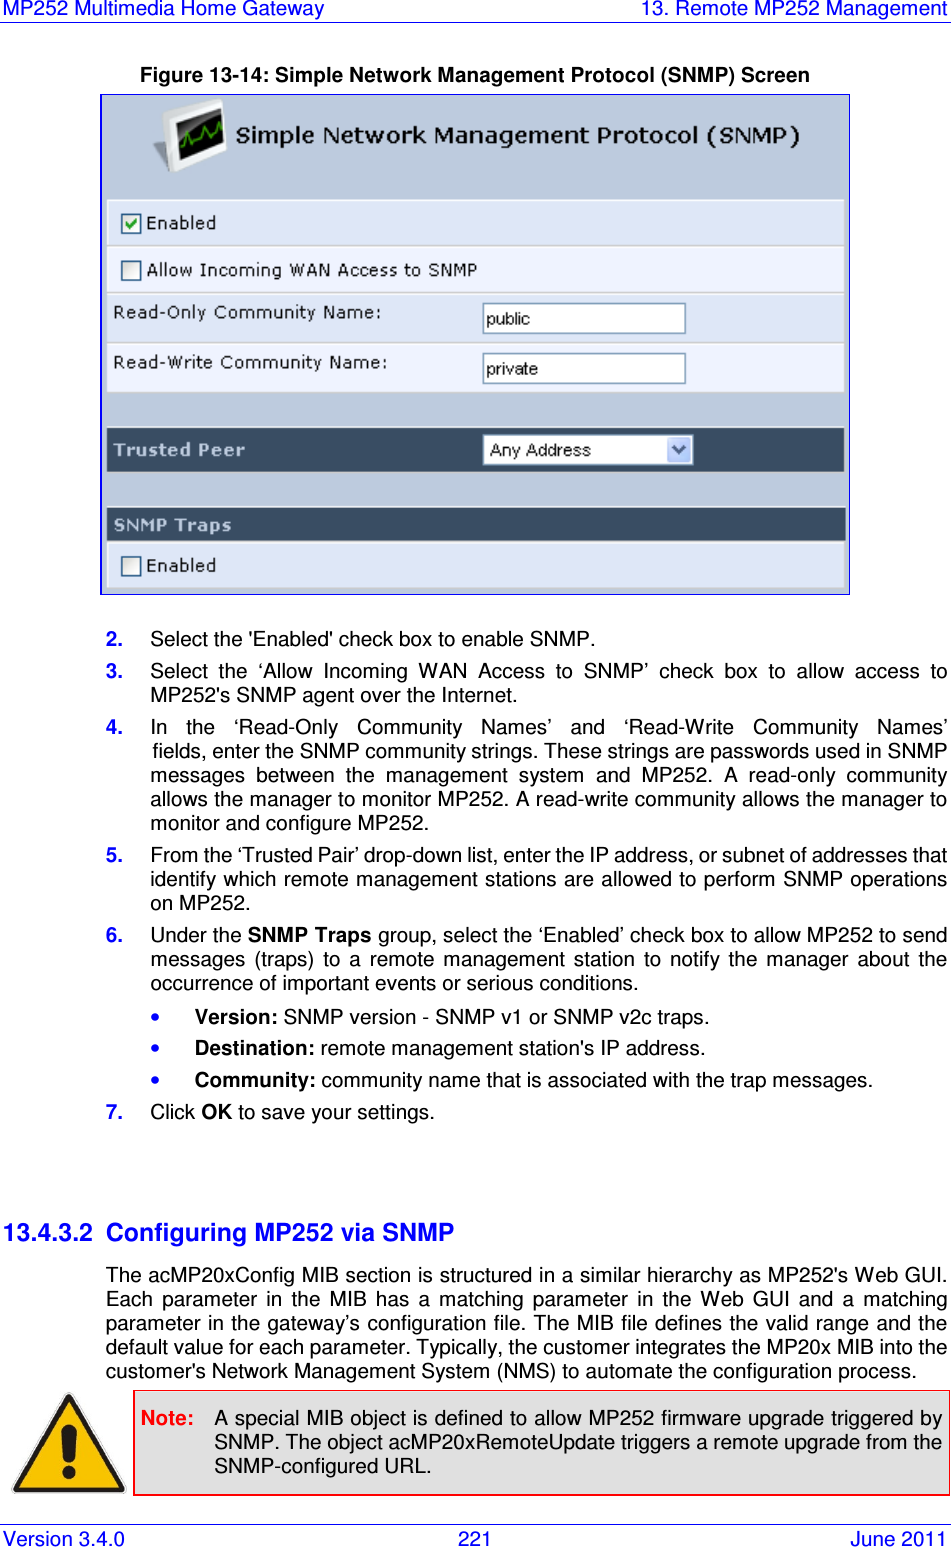 MP252 Multimedia Home Gateway  13. Remote MP252 Management Version 3.4.0  221  June 2011 Figure 13-14: Simple Network Management Protocol (SNMP) Screen   2.  Select the &apos;Enabled&apos; check box to enable SNMP. 3.  Select  the  ‘Allow  Incoming  WAN  Access  to  SNMP’  check  box  to  allow  access  to MP252&apos;s SNMP agent over the Internet. 4.  In  the  ‘Read-Only  Community  Names’  and  ‘Read-Write  Community  Names’    fields, enter the SNMP community strings. These strings are passwords used in SNMP messages  between  the  management  system  and  MP252.  A  read-only  community allows the manager to monitor MP252. A read-write community allows the manager to monitor and configure MP252. 5.  From the ‘Trusted Pair’ drop-down list, enter the IP address, or subnet of addresses that identify which remote management stations are allowed to perform SNMP operations on MP252. 6.  Under the SNMP Traps group, select the ‘Enabled’ check box to allow MP252 to send messages  (traps)  to  a  remote  management  station  to  notify  the  manager  about  the occurrence of important events or serious conditions.   • Version: SNMP version - SNMP v1 or SNMP v2c traps. • Destination: remote management station&apos;s IP address. • Community: community name that is associated with the trap messages. 7.  Click OK to save your settings.   13.4.3.2  Configuring MP252 via SNMP The acMP20xConfig MIB section is structured in a similar hierarchy as MP252&apos;s Web GUI. Each  parameter  in  the  MIB  has  a  matching  parameter  in  the  Web  GUI  and  a  matching parameter in the gateway’s configuration file. The MIB file defines the valid range and the default value for each parameter. Typically, the customer integrates the MP20x MIB into the customer&apos;s Network Management System (NMS) to automate the configuration process.  Note:  A special MIB object is defined to allow MP252 firmware upgrade triggered by SNMP. The object acMP20xRemoteUpdate triggers a remote upgrade from the SNMP-configured URL.  